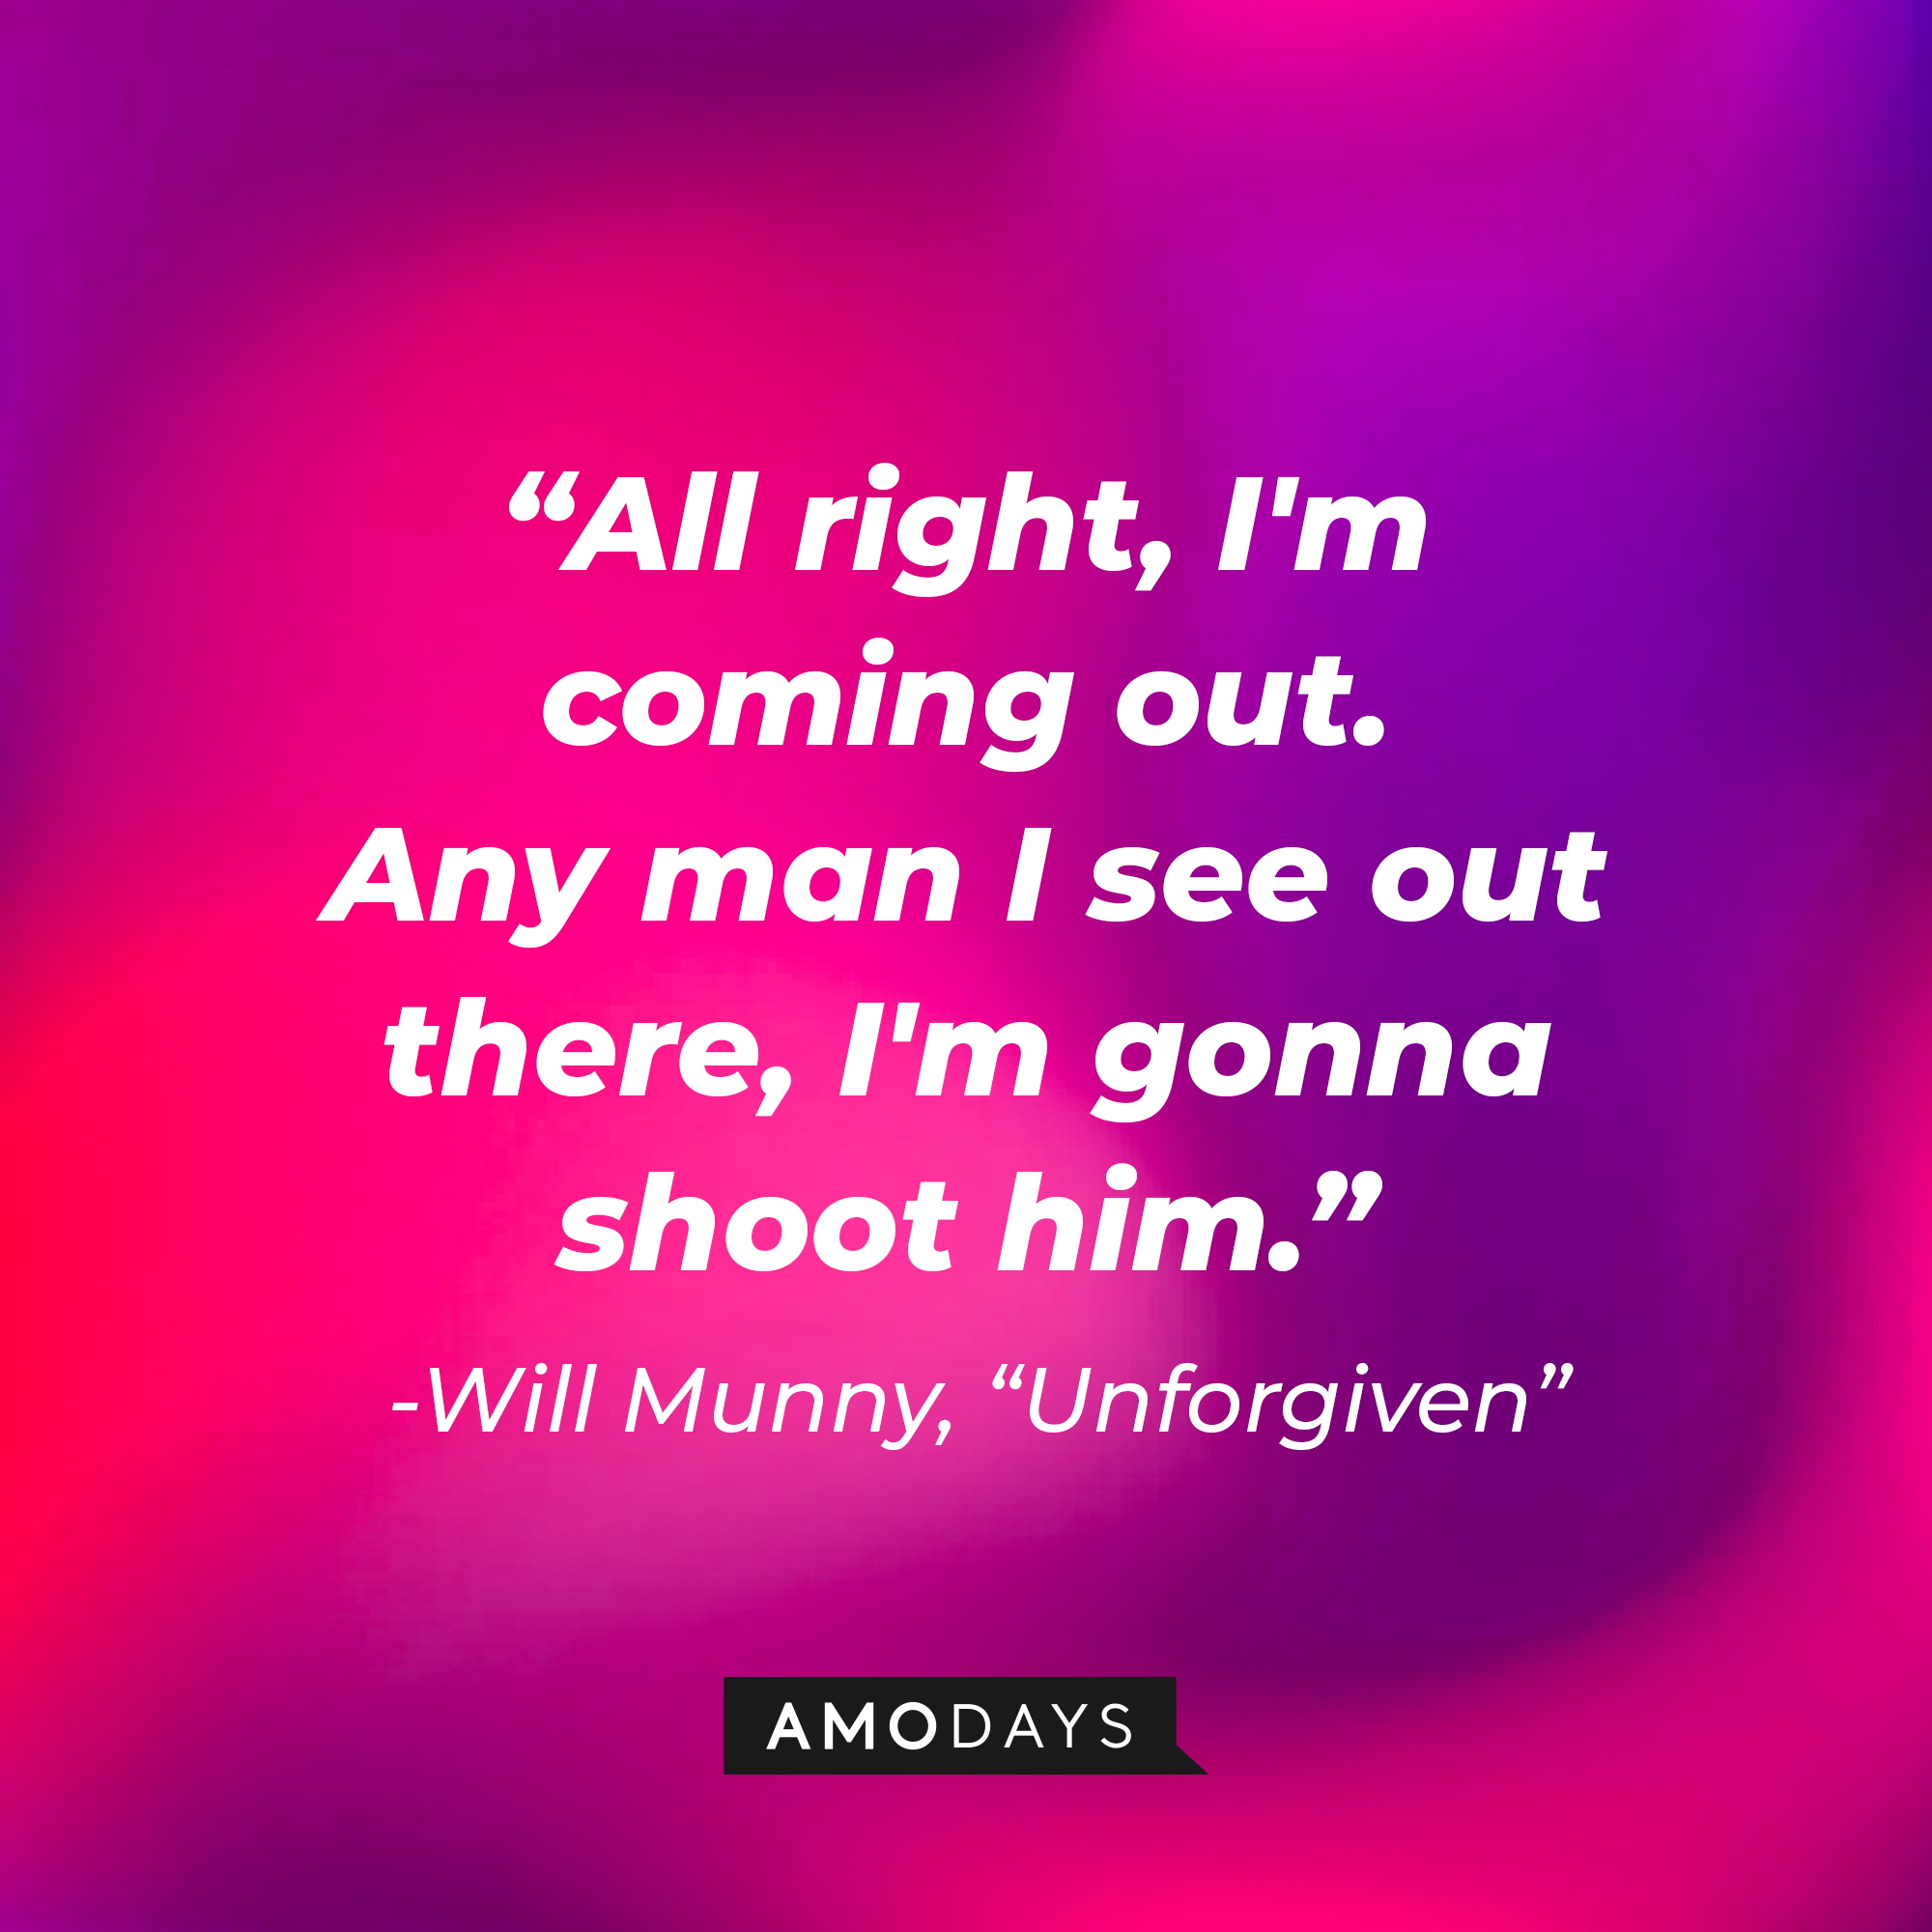 William Munny's quote in "Unforgiven:" "All right, I'm coming out. Any man I see out there, I'm gonna shoot him." | Source: AmoDays